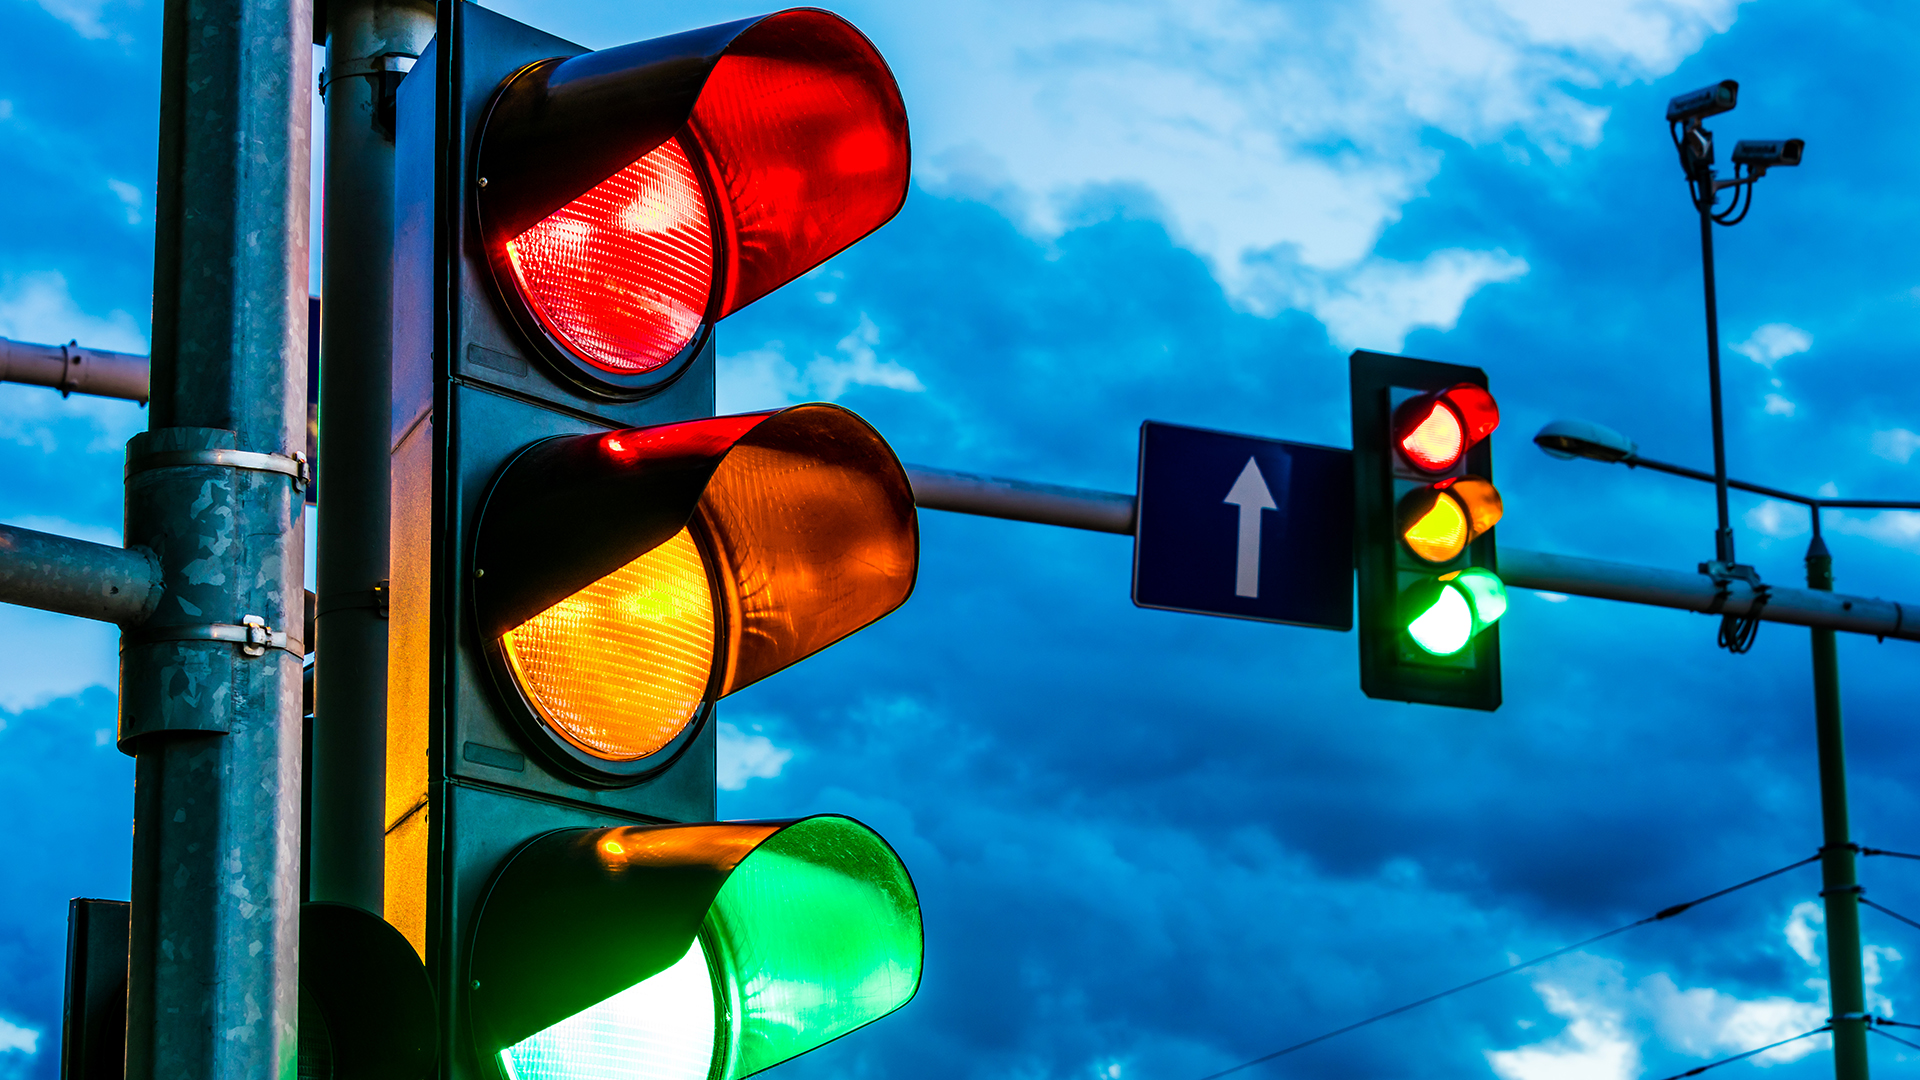 Smart traffic light technology controlled using Artificial Intelligence